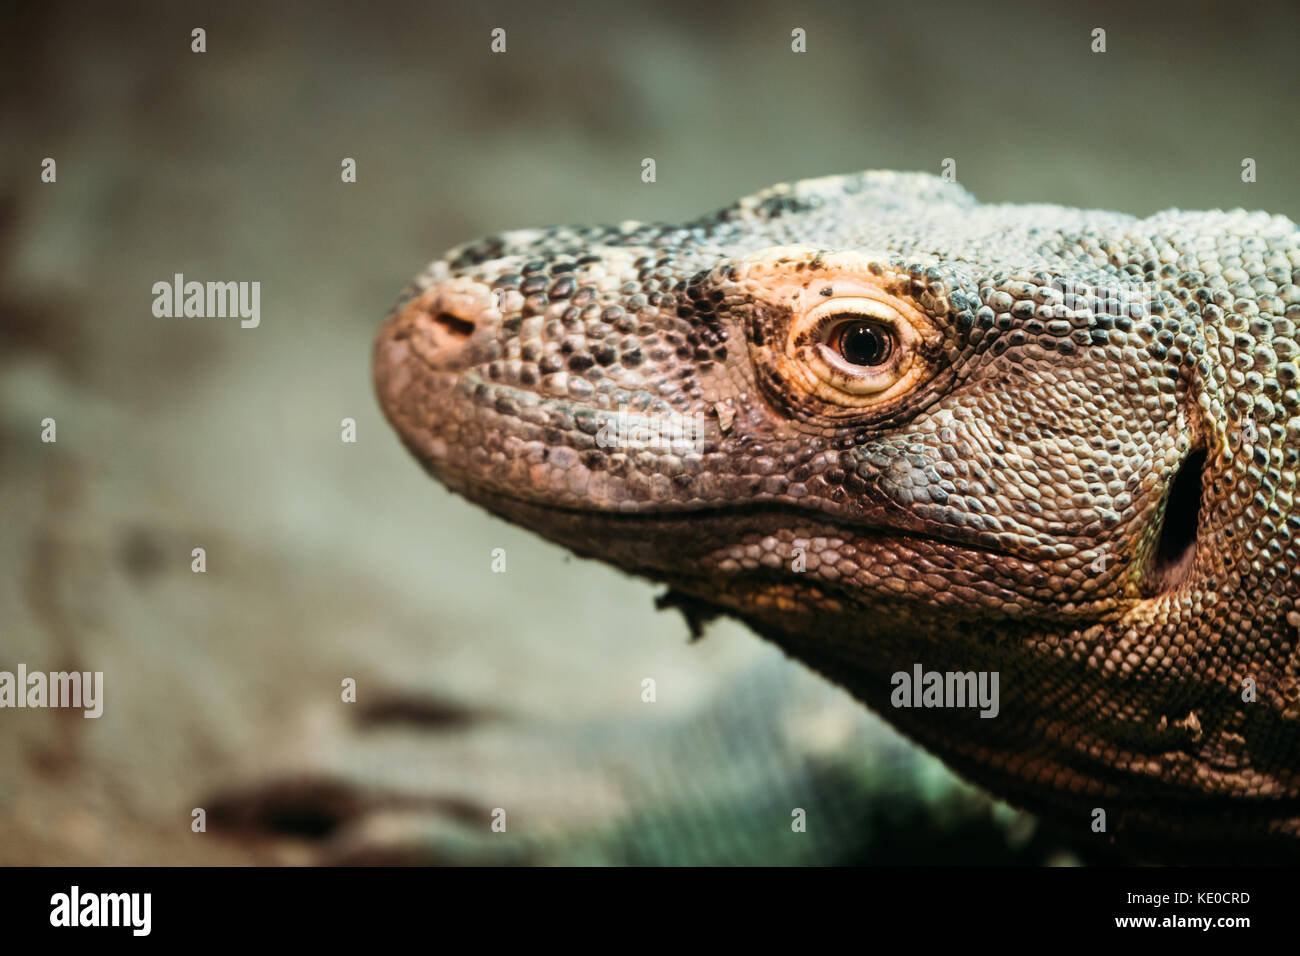 Close-up picture of lizard standing calmly in nature Stock Photo